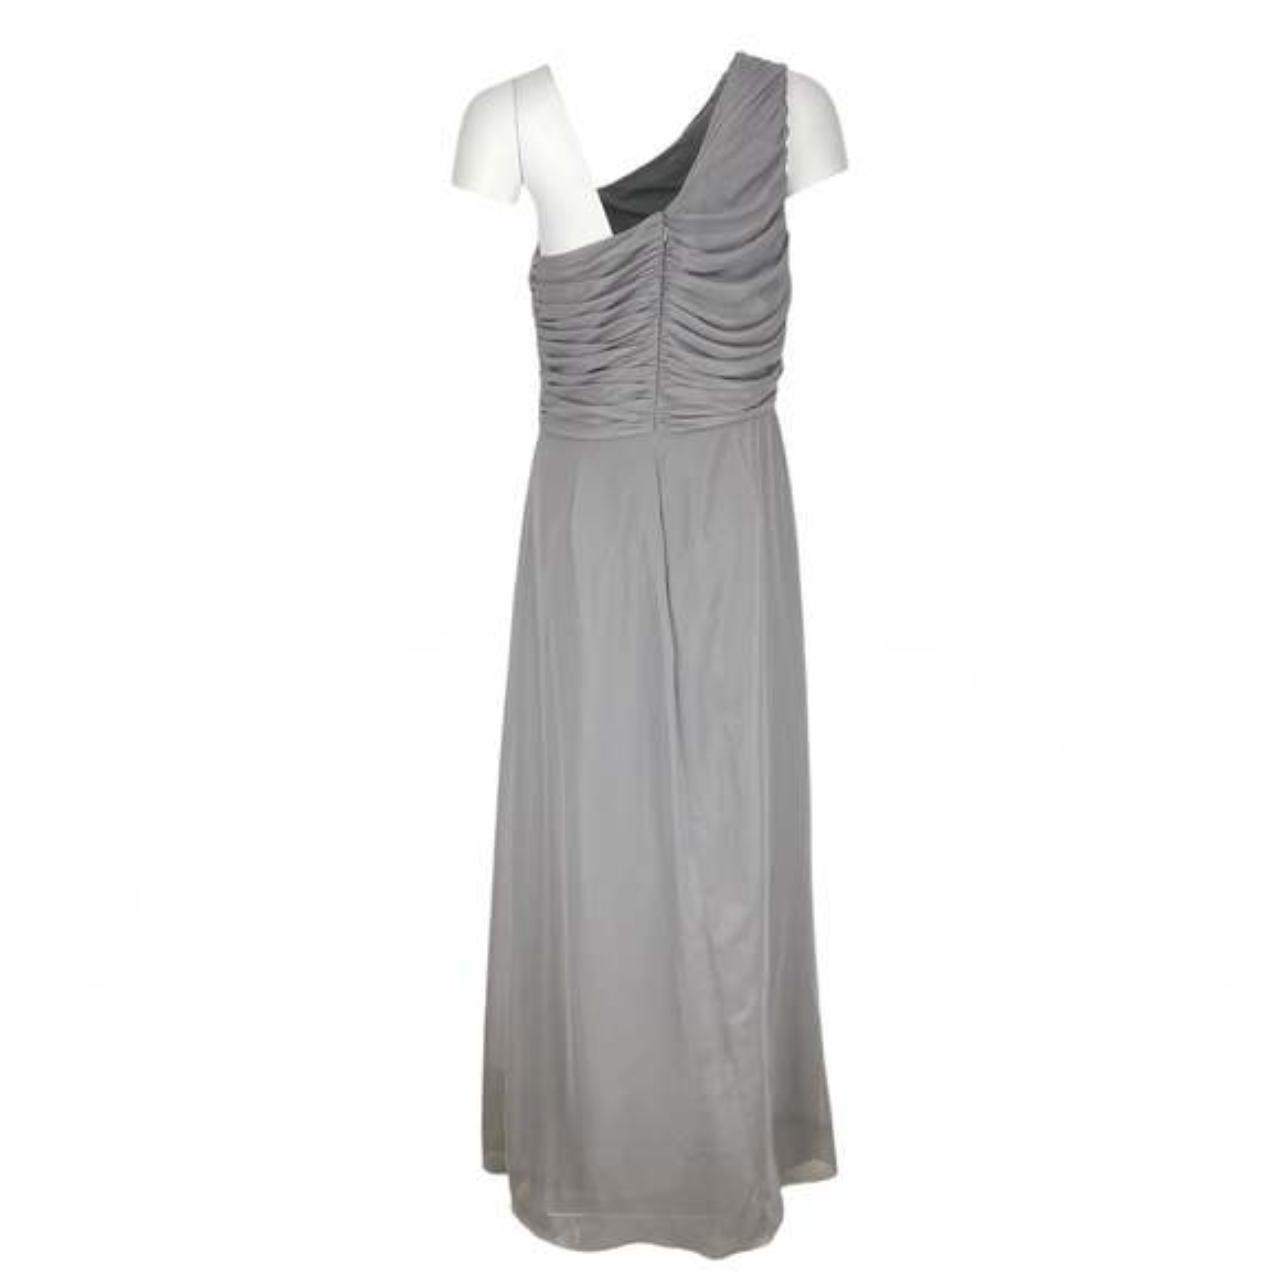 Product Image 3 - After Six Gray Gown

Description:
* Gray
*